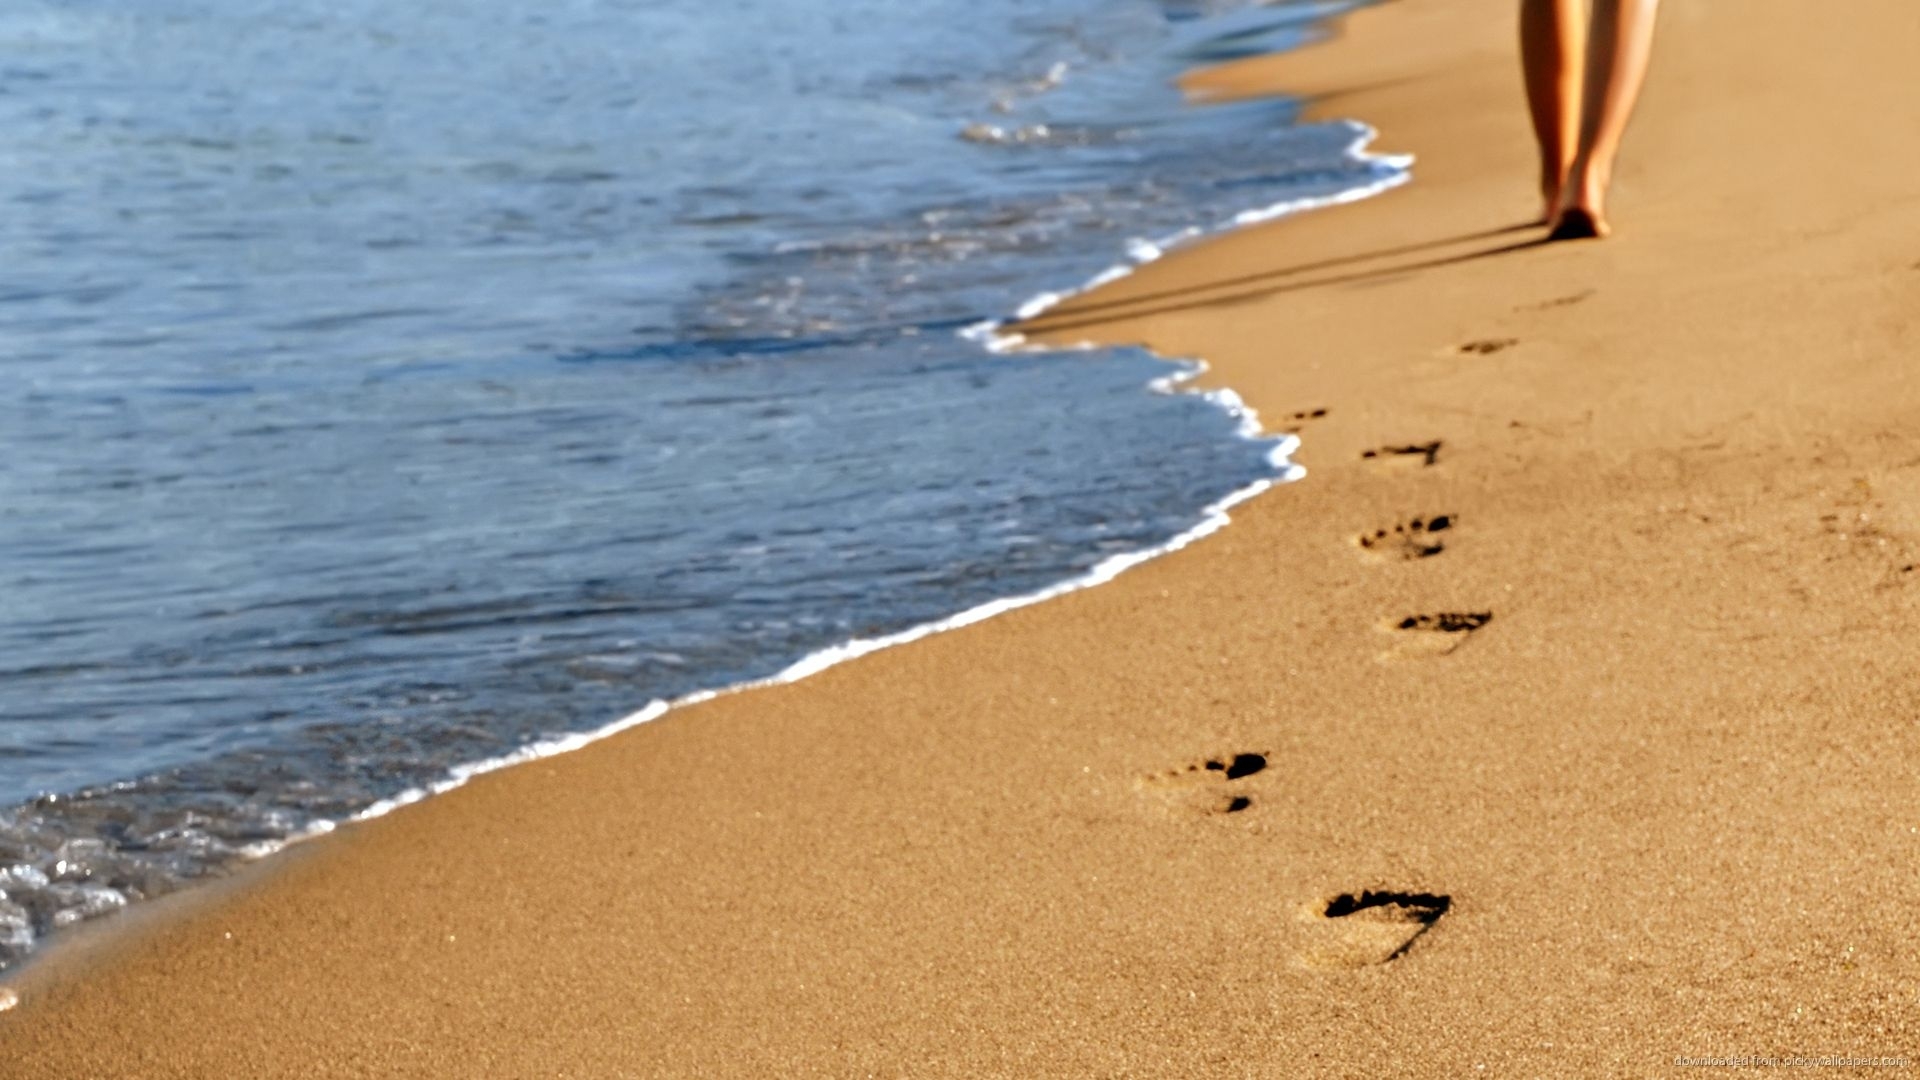 10 New Footprints In The Sand Background FULL HD 1080p For PC Desktop 2020